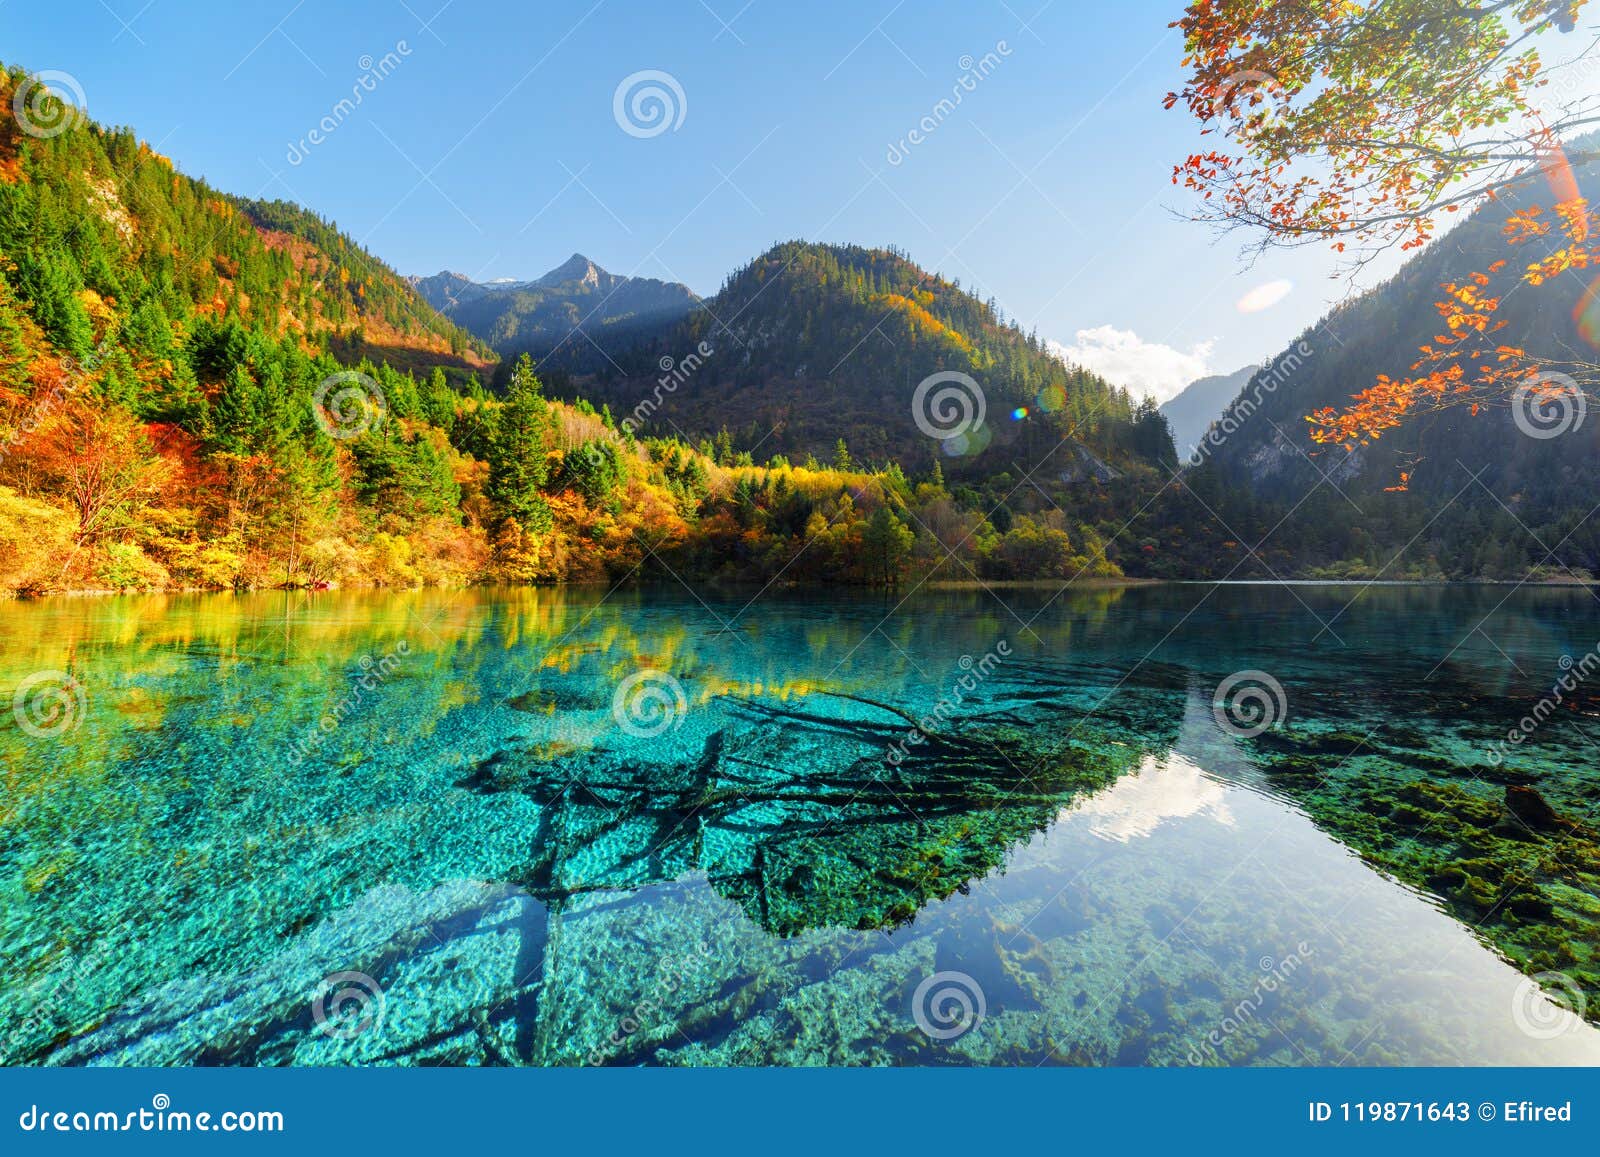 The Five Flower Lake Among Wooded Mountains And Autumn Forest Stock